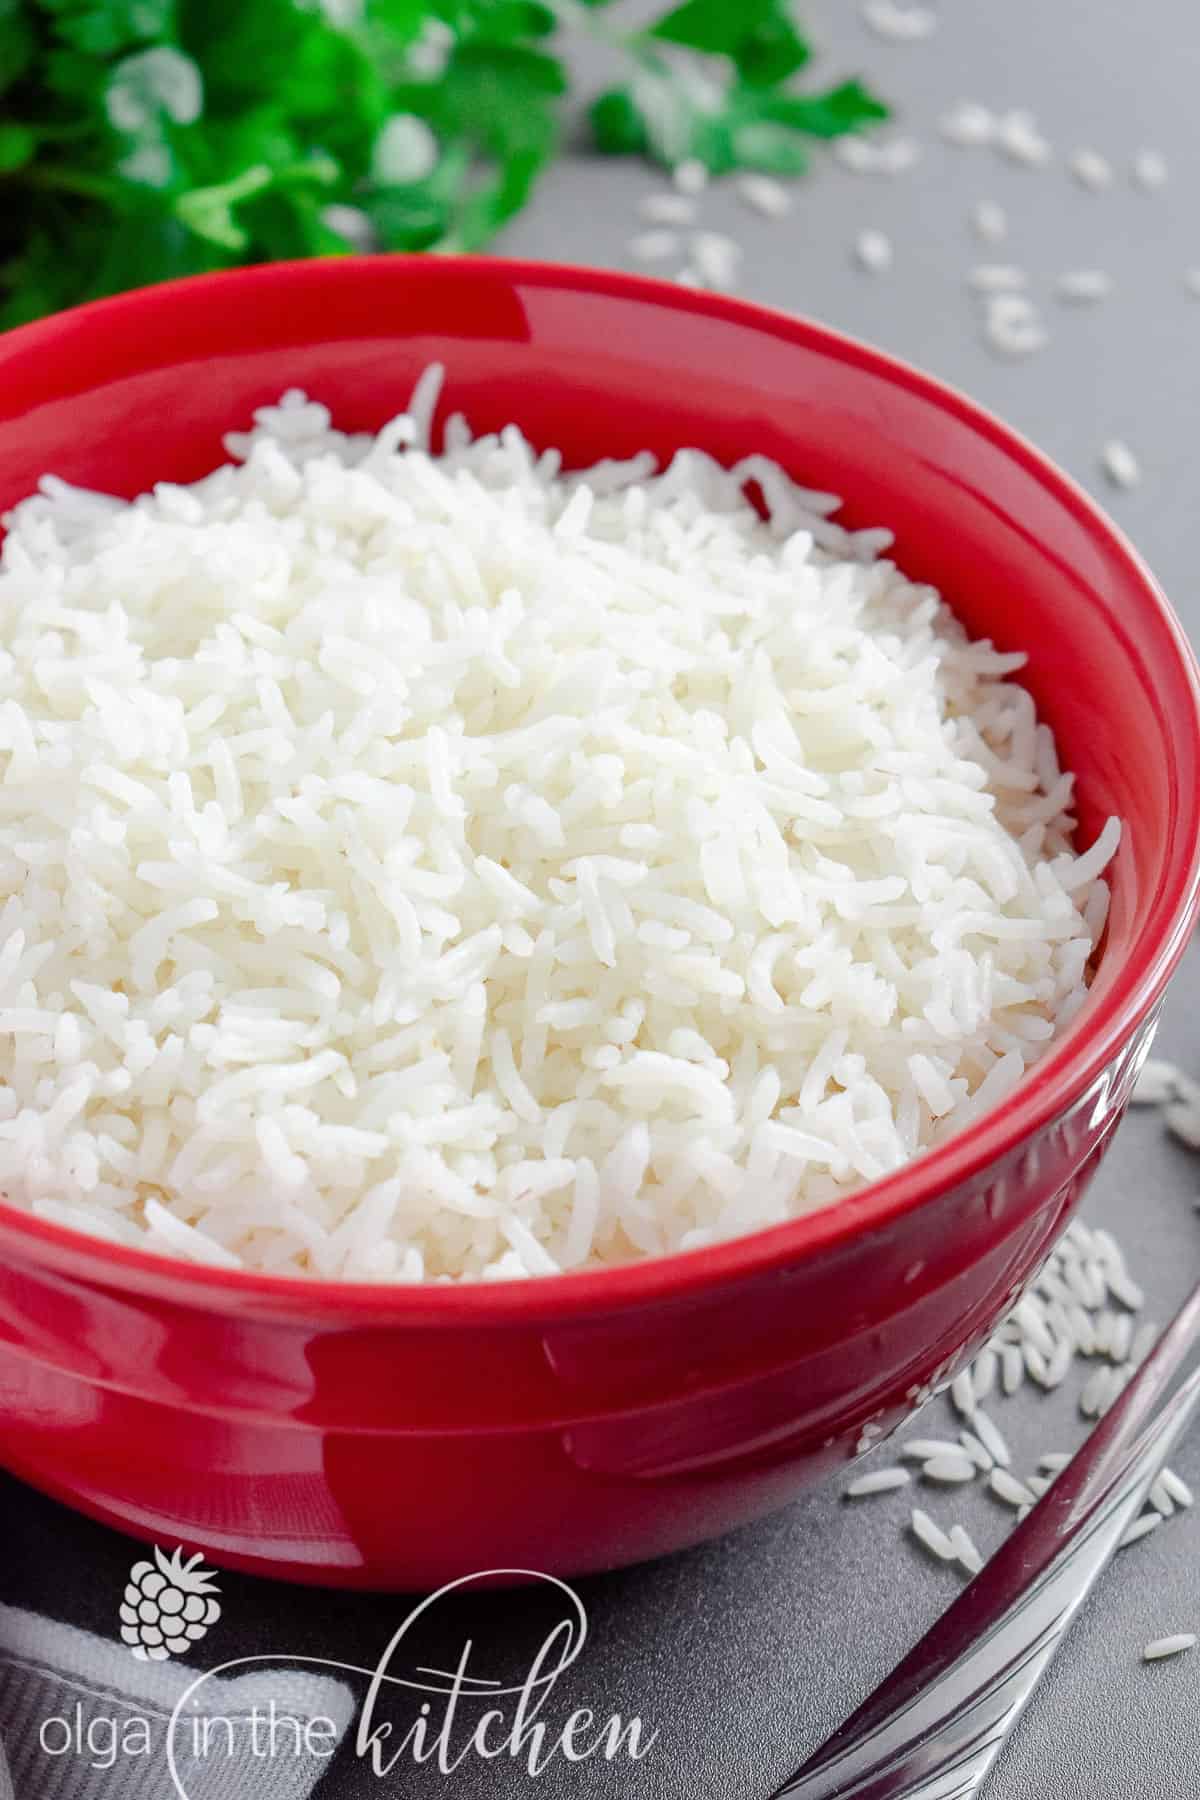 Learn how to cook perfect rice every time. This is our go-to simple, but reliable stove-top method of How to Cook White Rice to achieve perfectly tender and fluffy texture every time. #howtocookrice #whiterice #longgrainrice #basmatirice #jasminerice #olgainthekitchen #rice #sidedish #howto